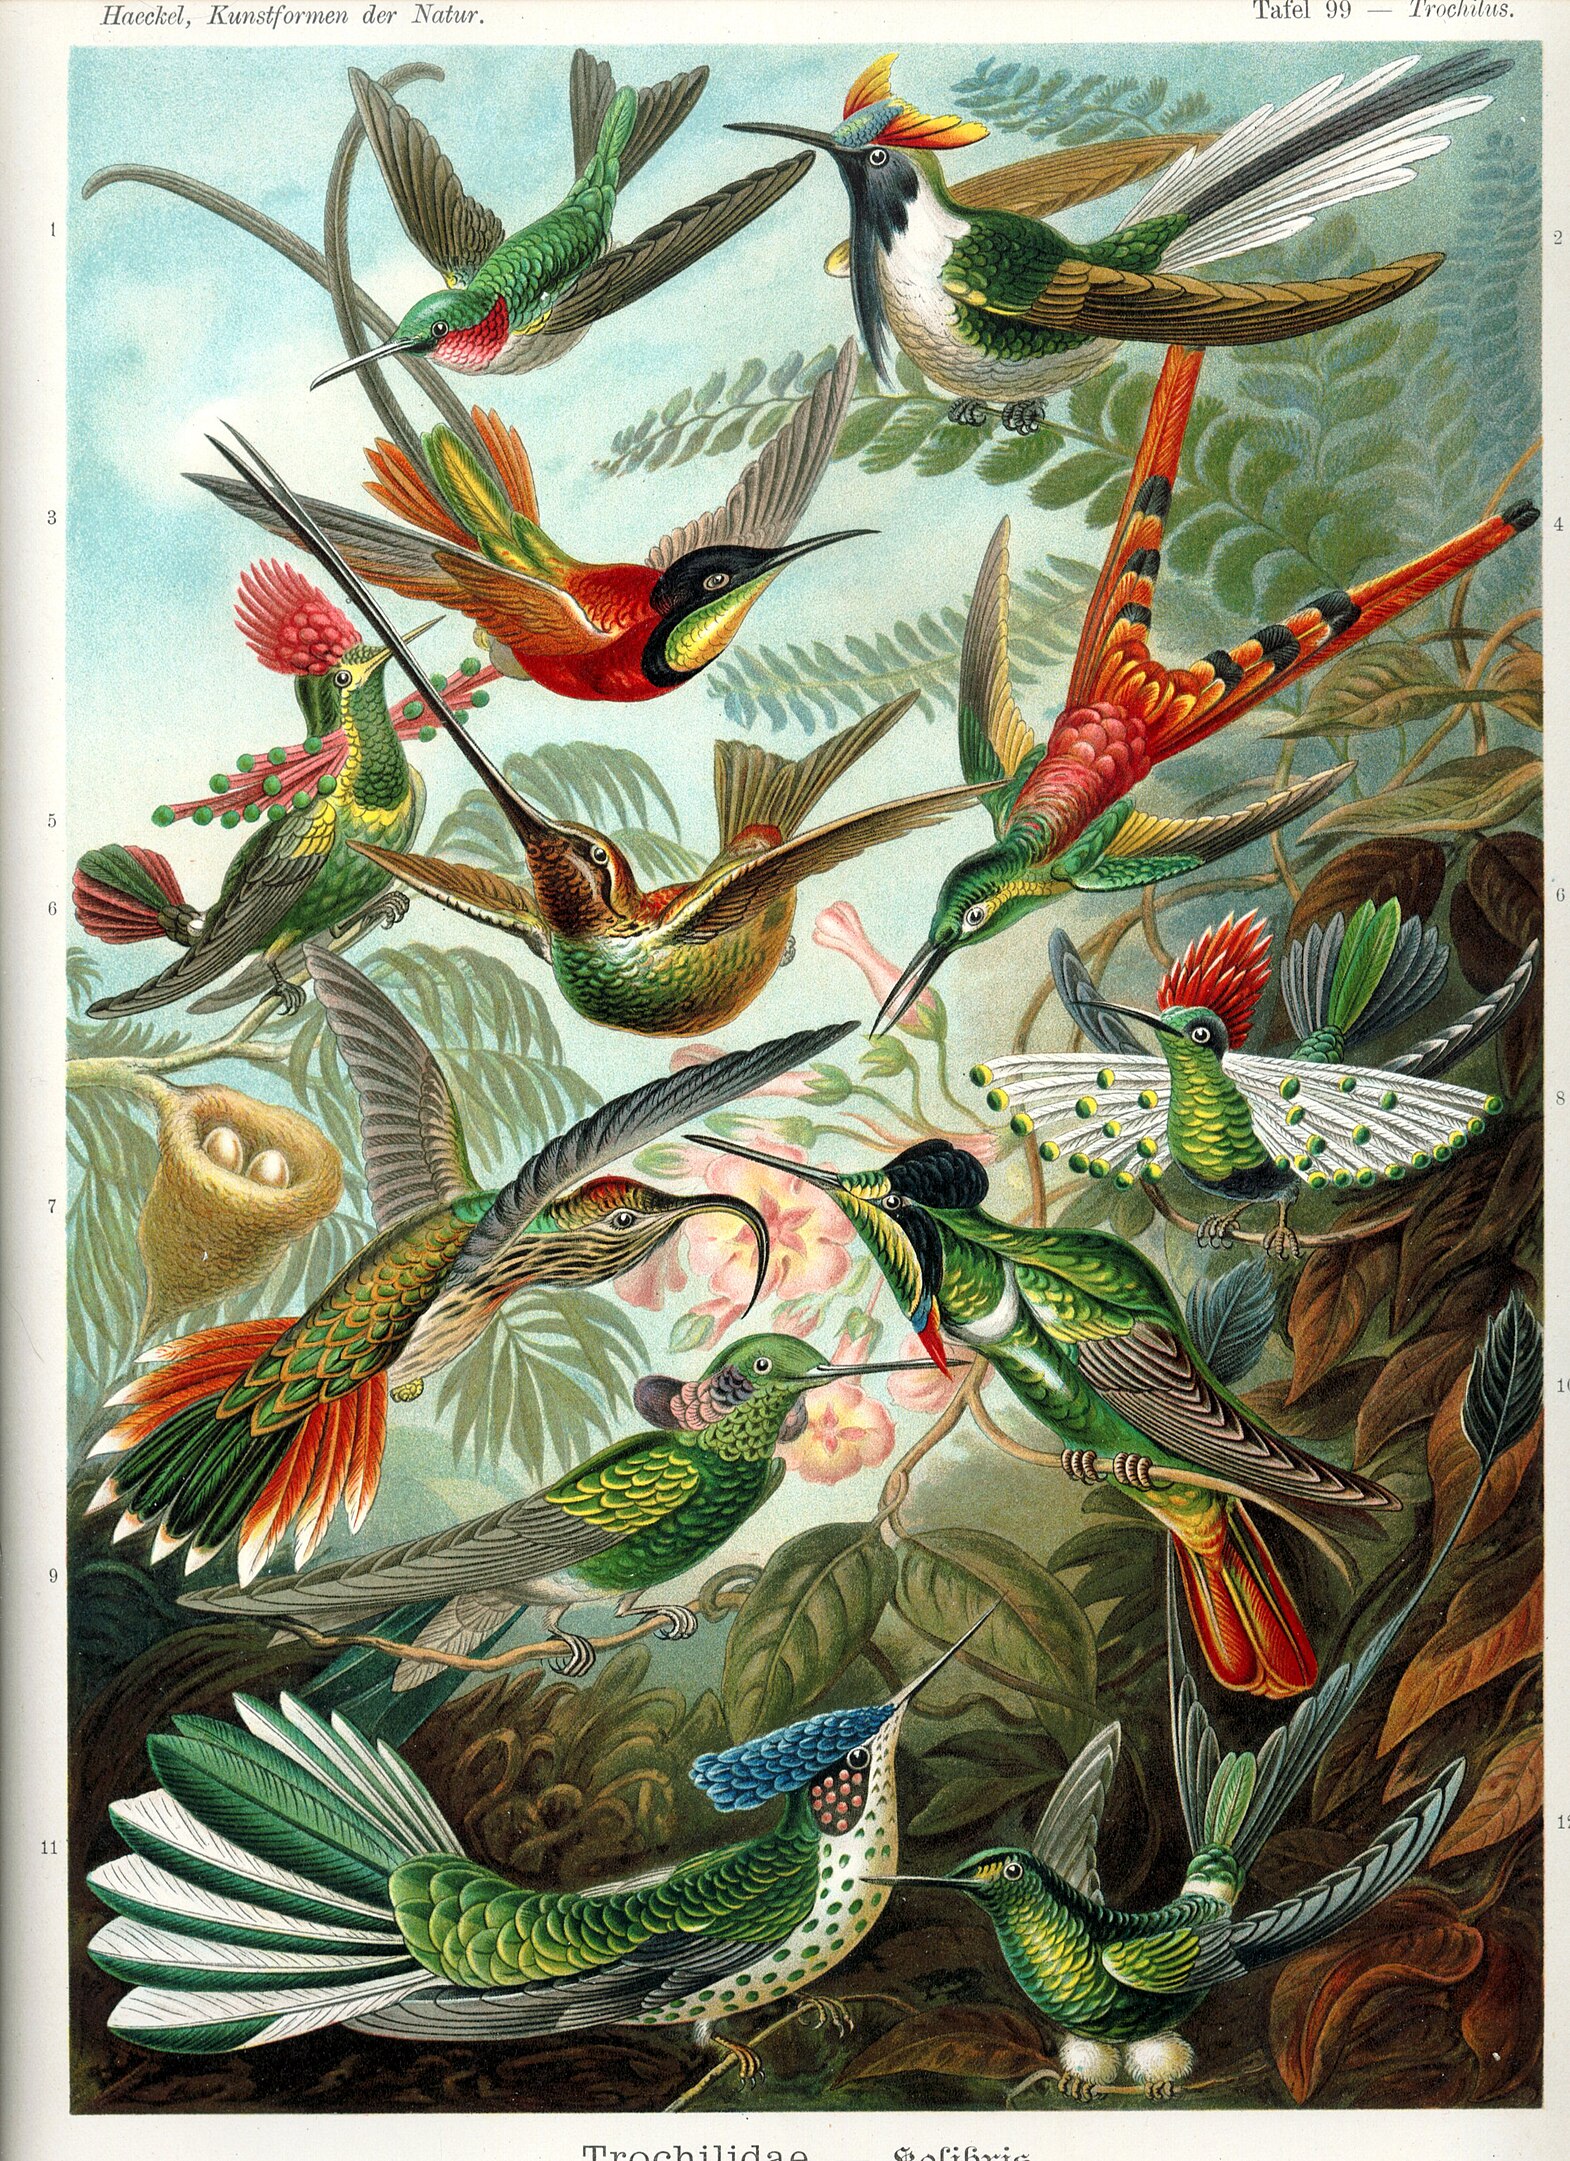 An illustration of various birds in a tropical rainforest